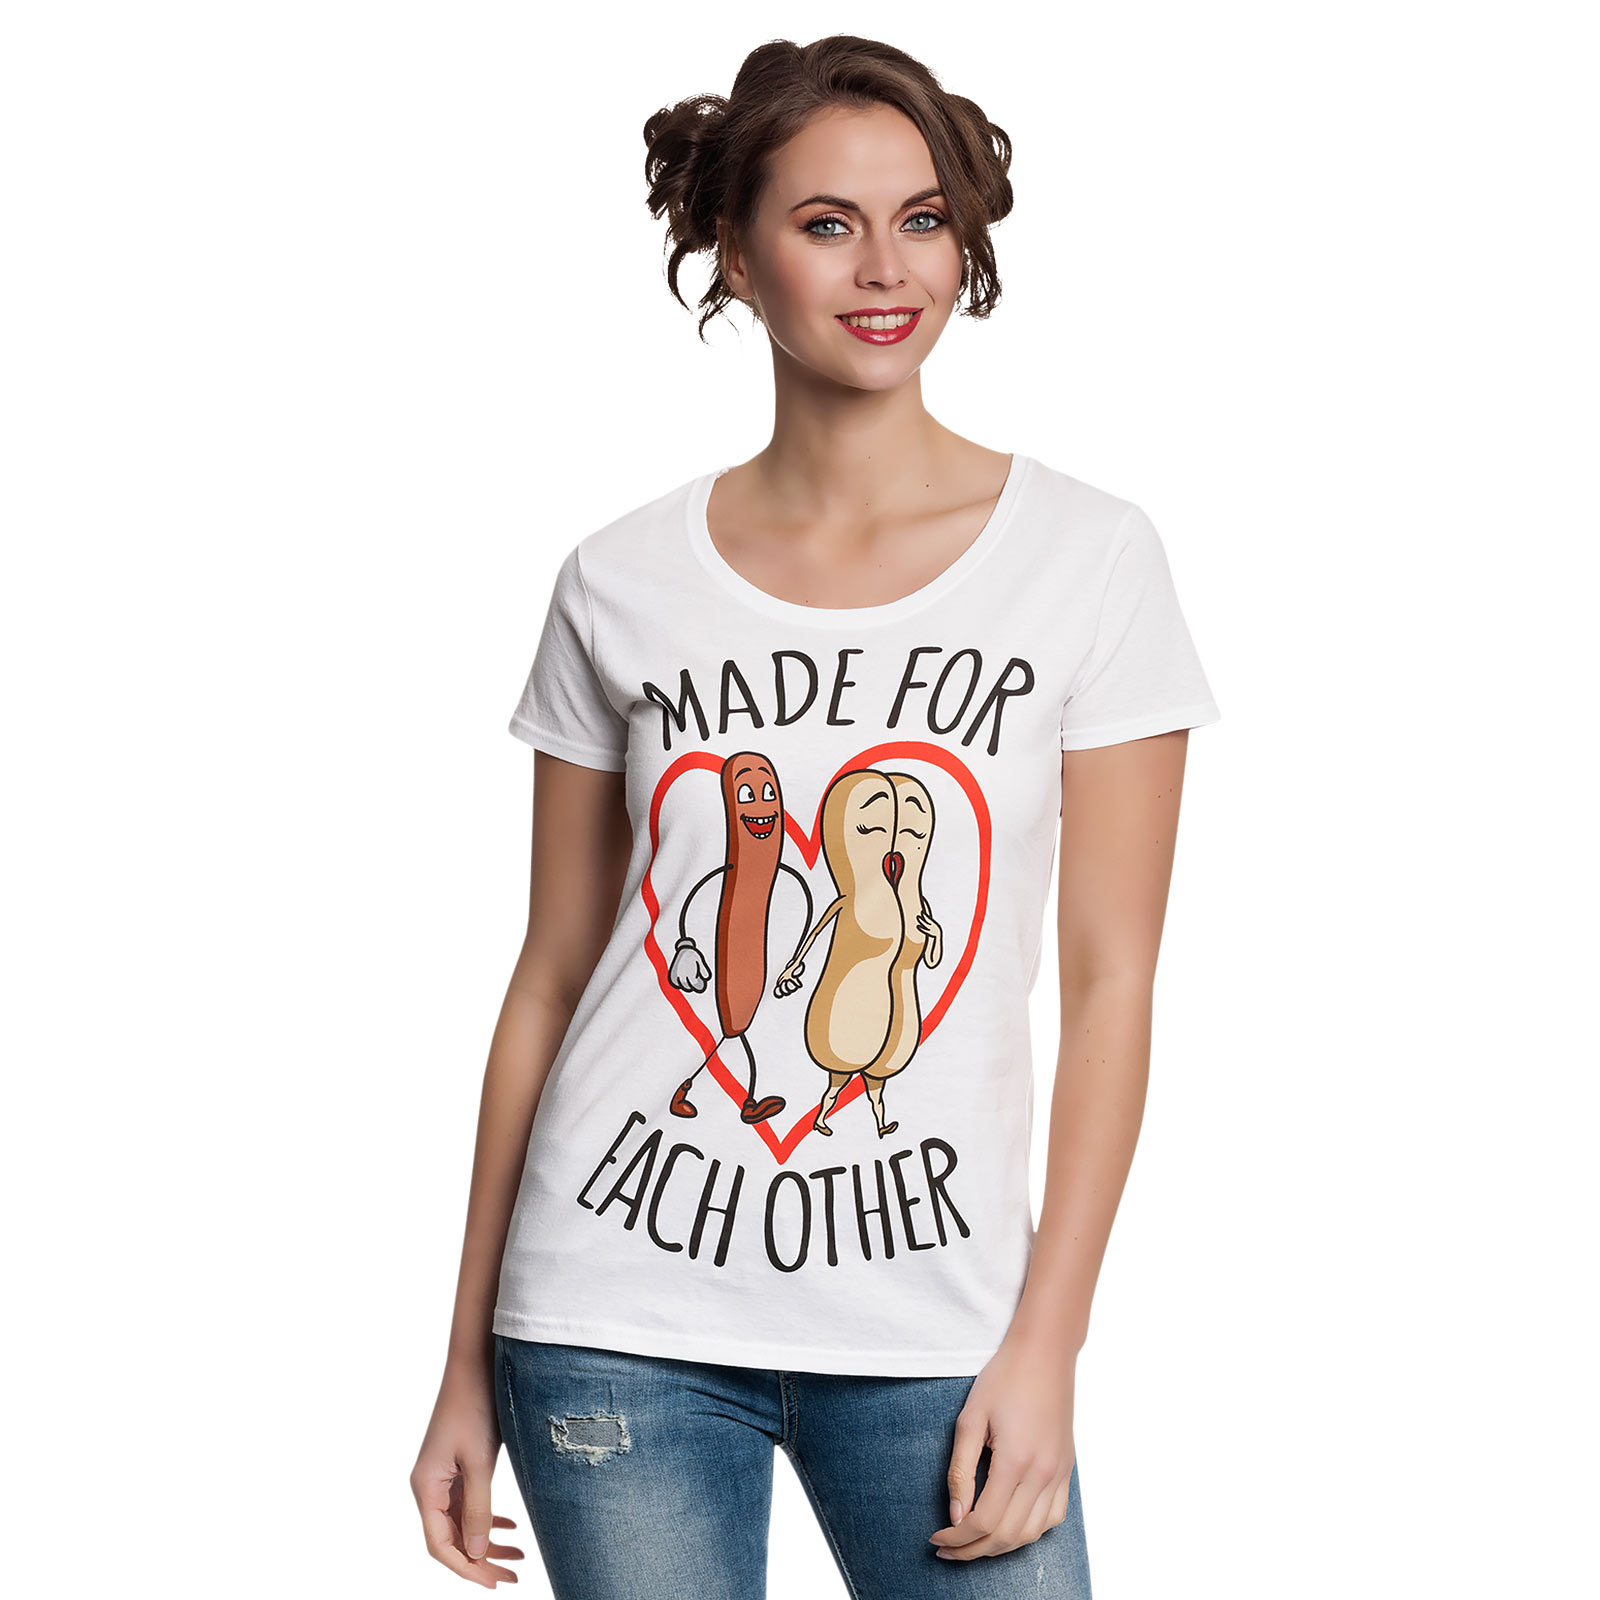 Sausage Party - Made For Each Other T-Shirt Damen weiß